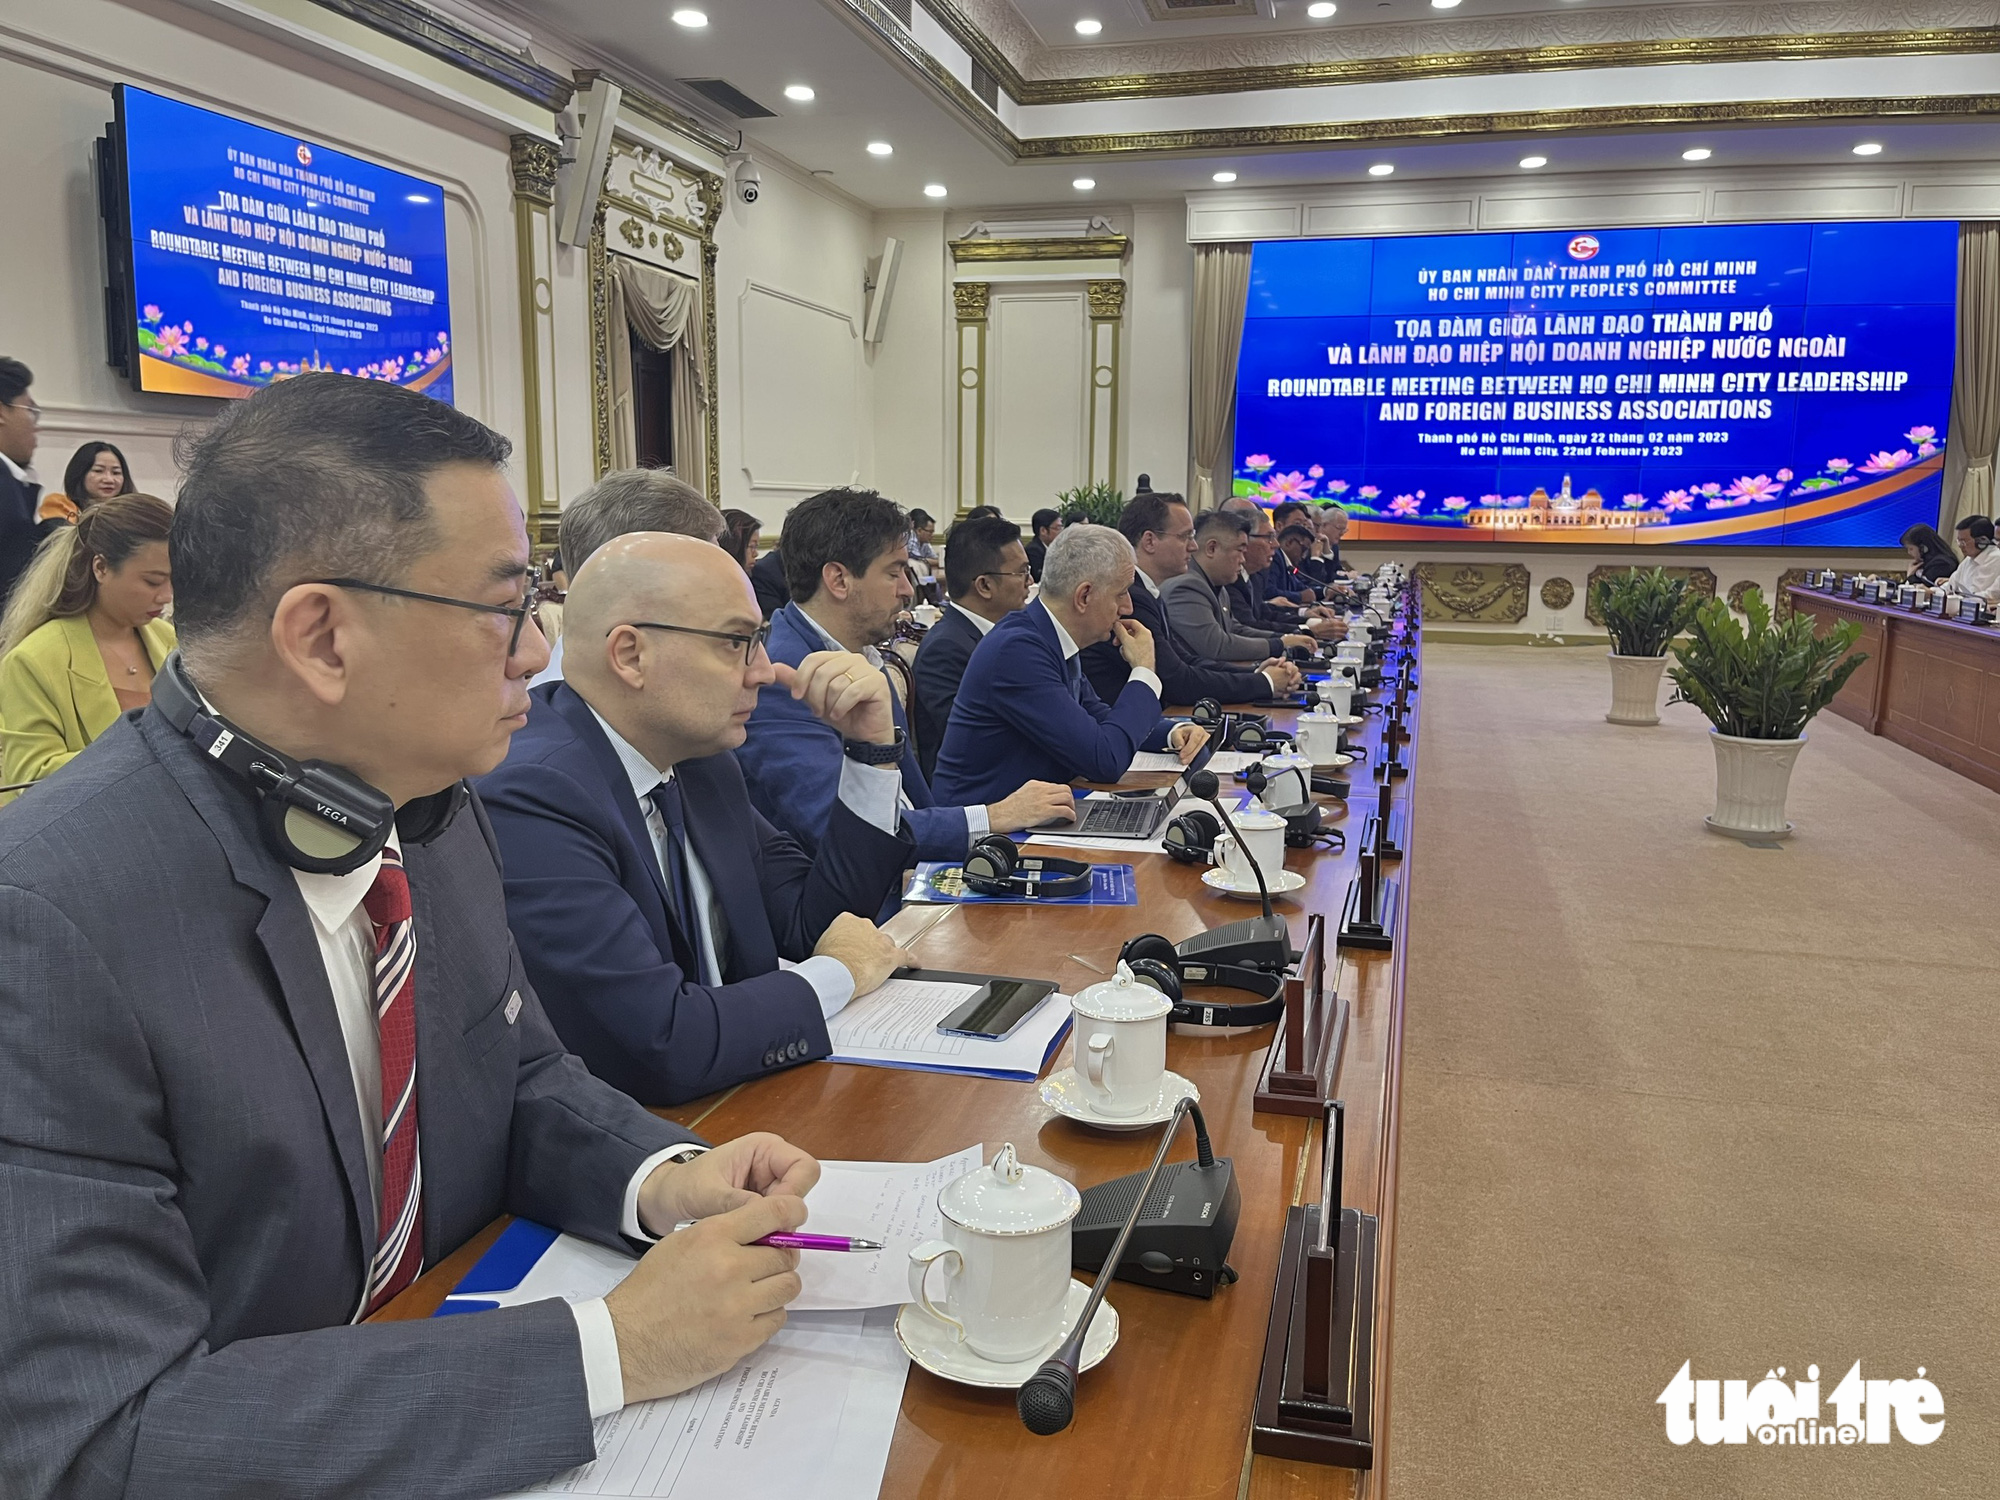 Leaders of foreign business associations in Ho Chi Minh City propose many solutions to improve the quality of life in the city. Photo: N.Binh / Tuoi Tre